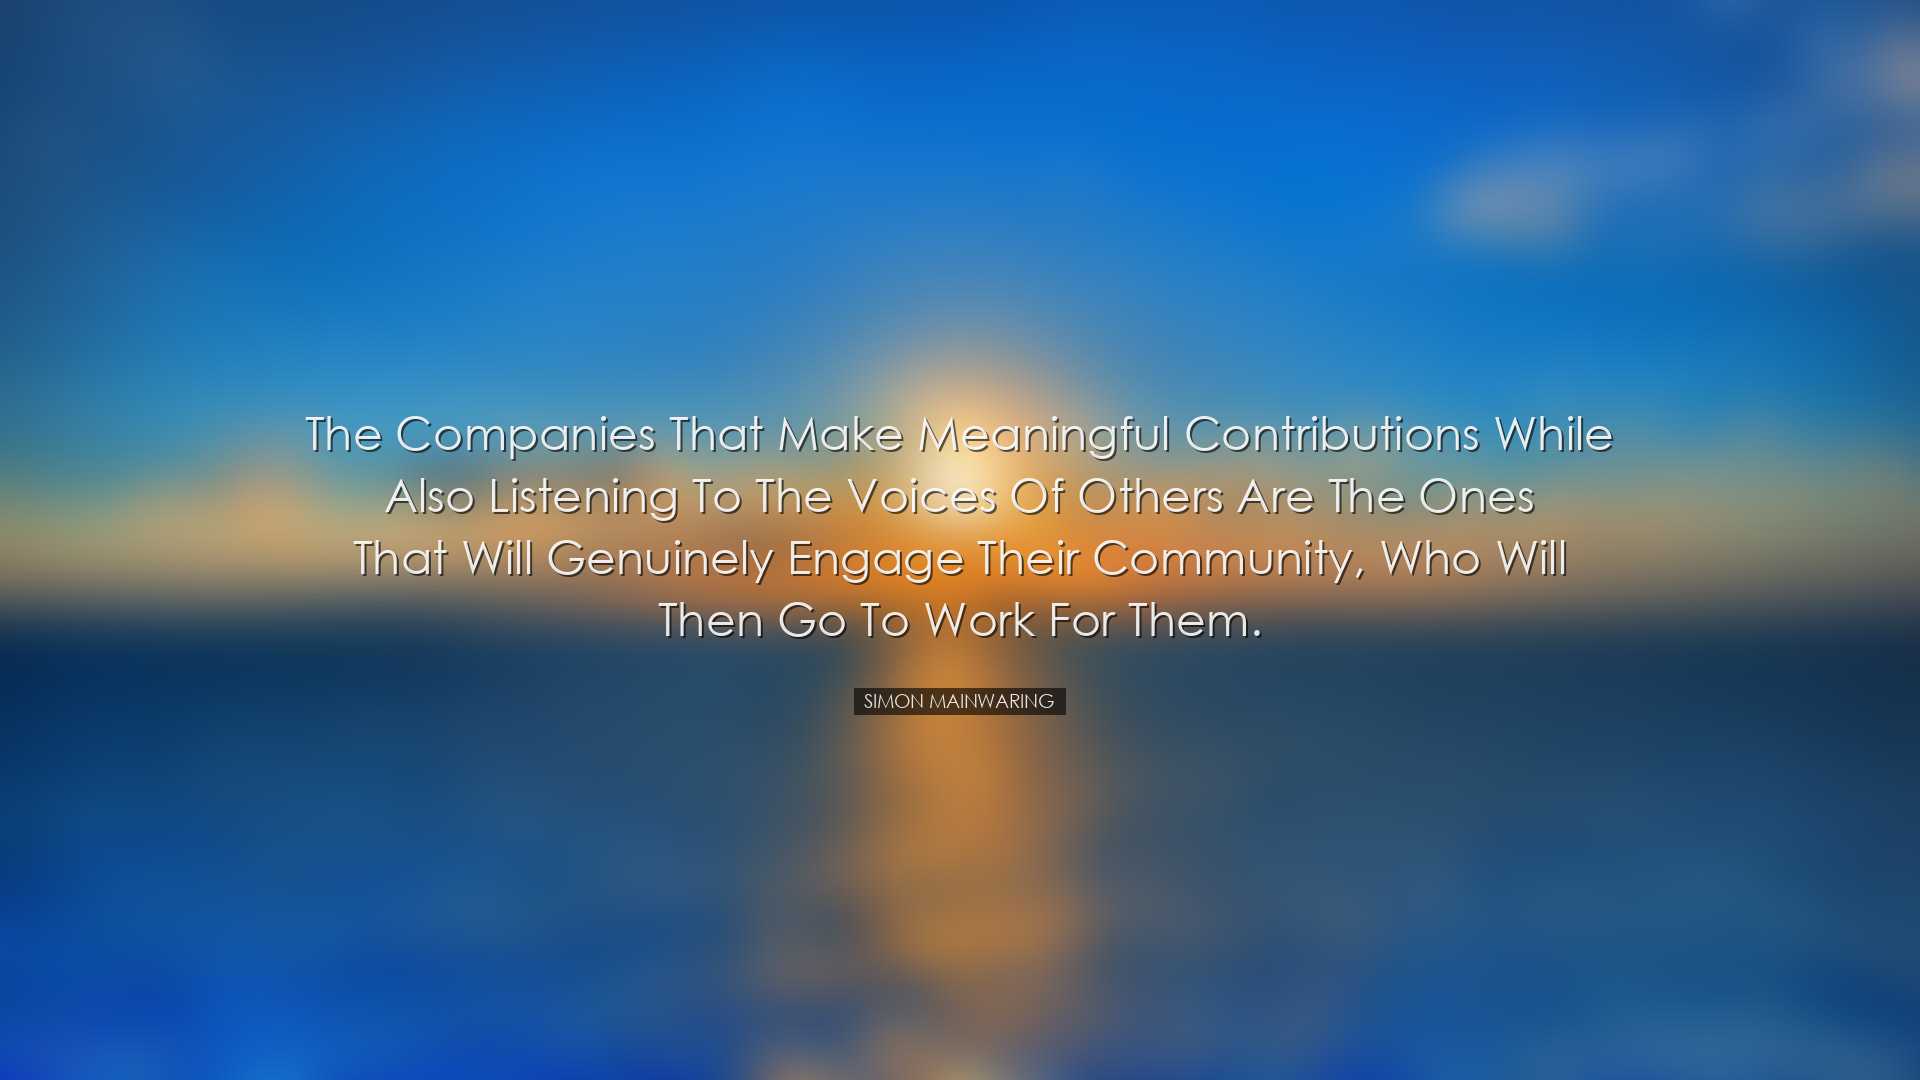 The companies that make meaningful contributions while also listen